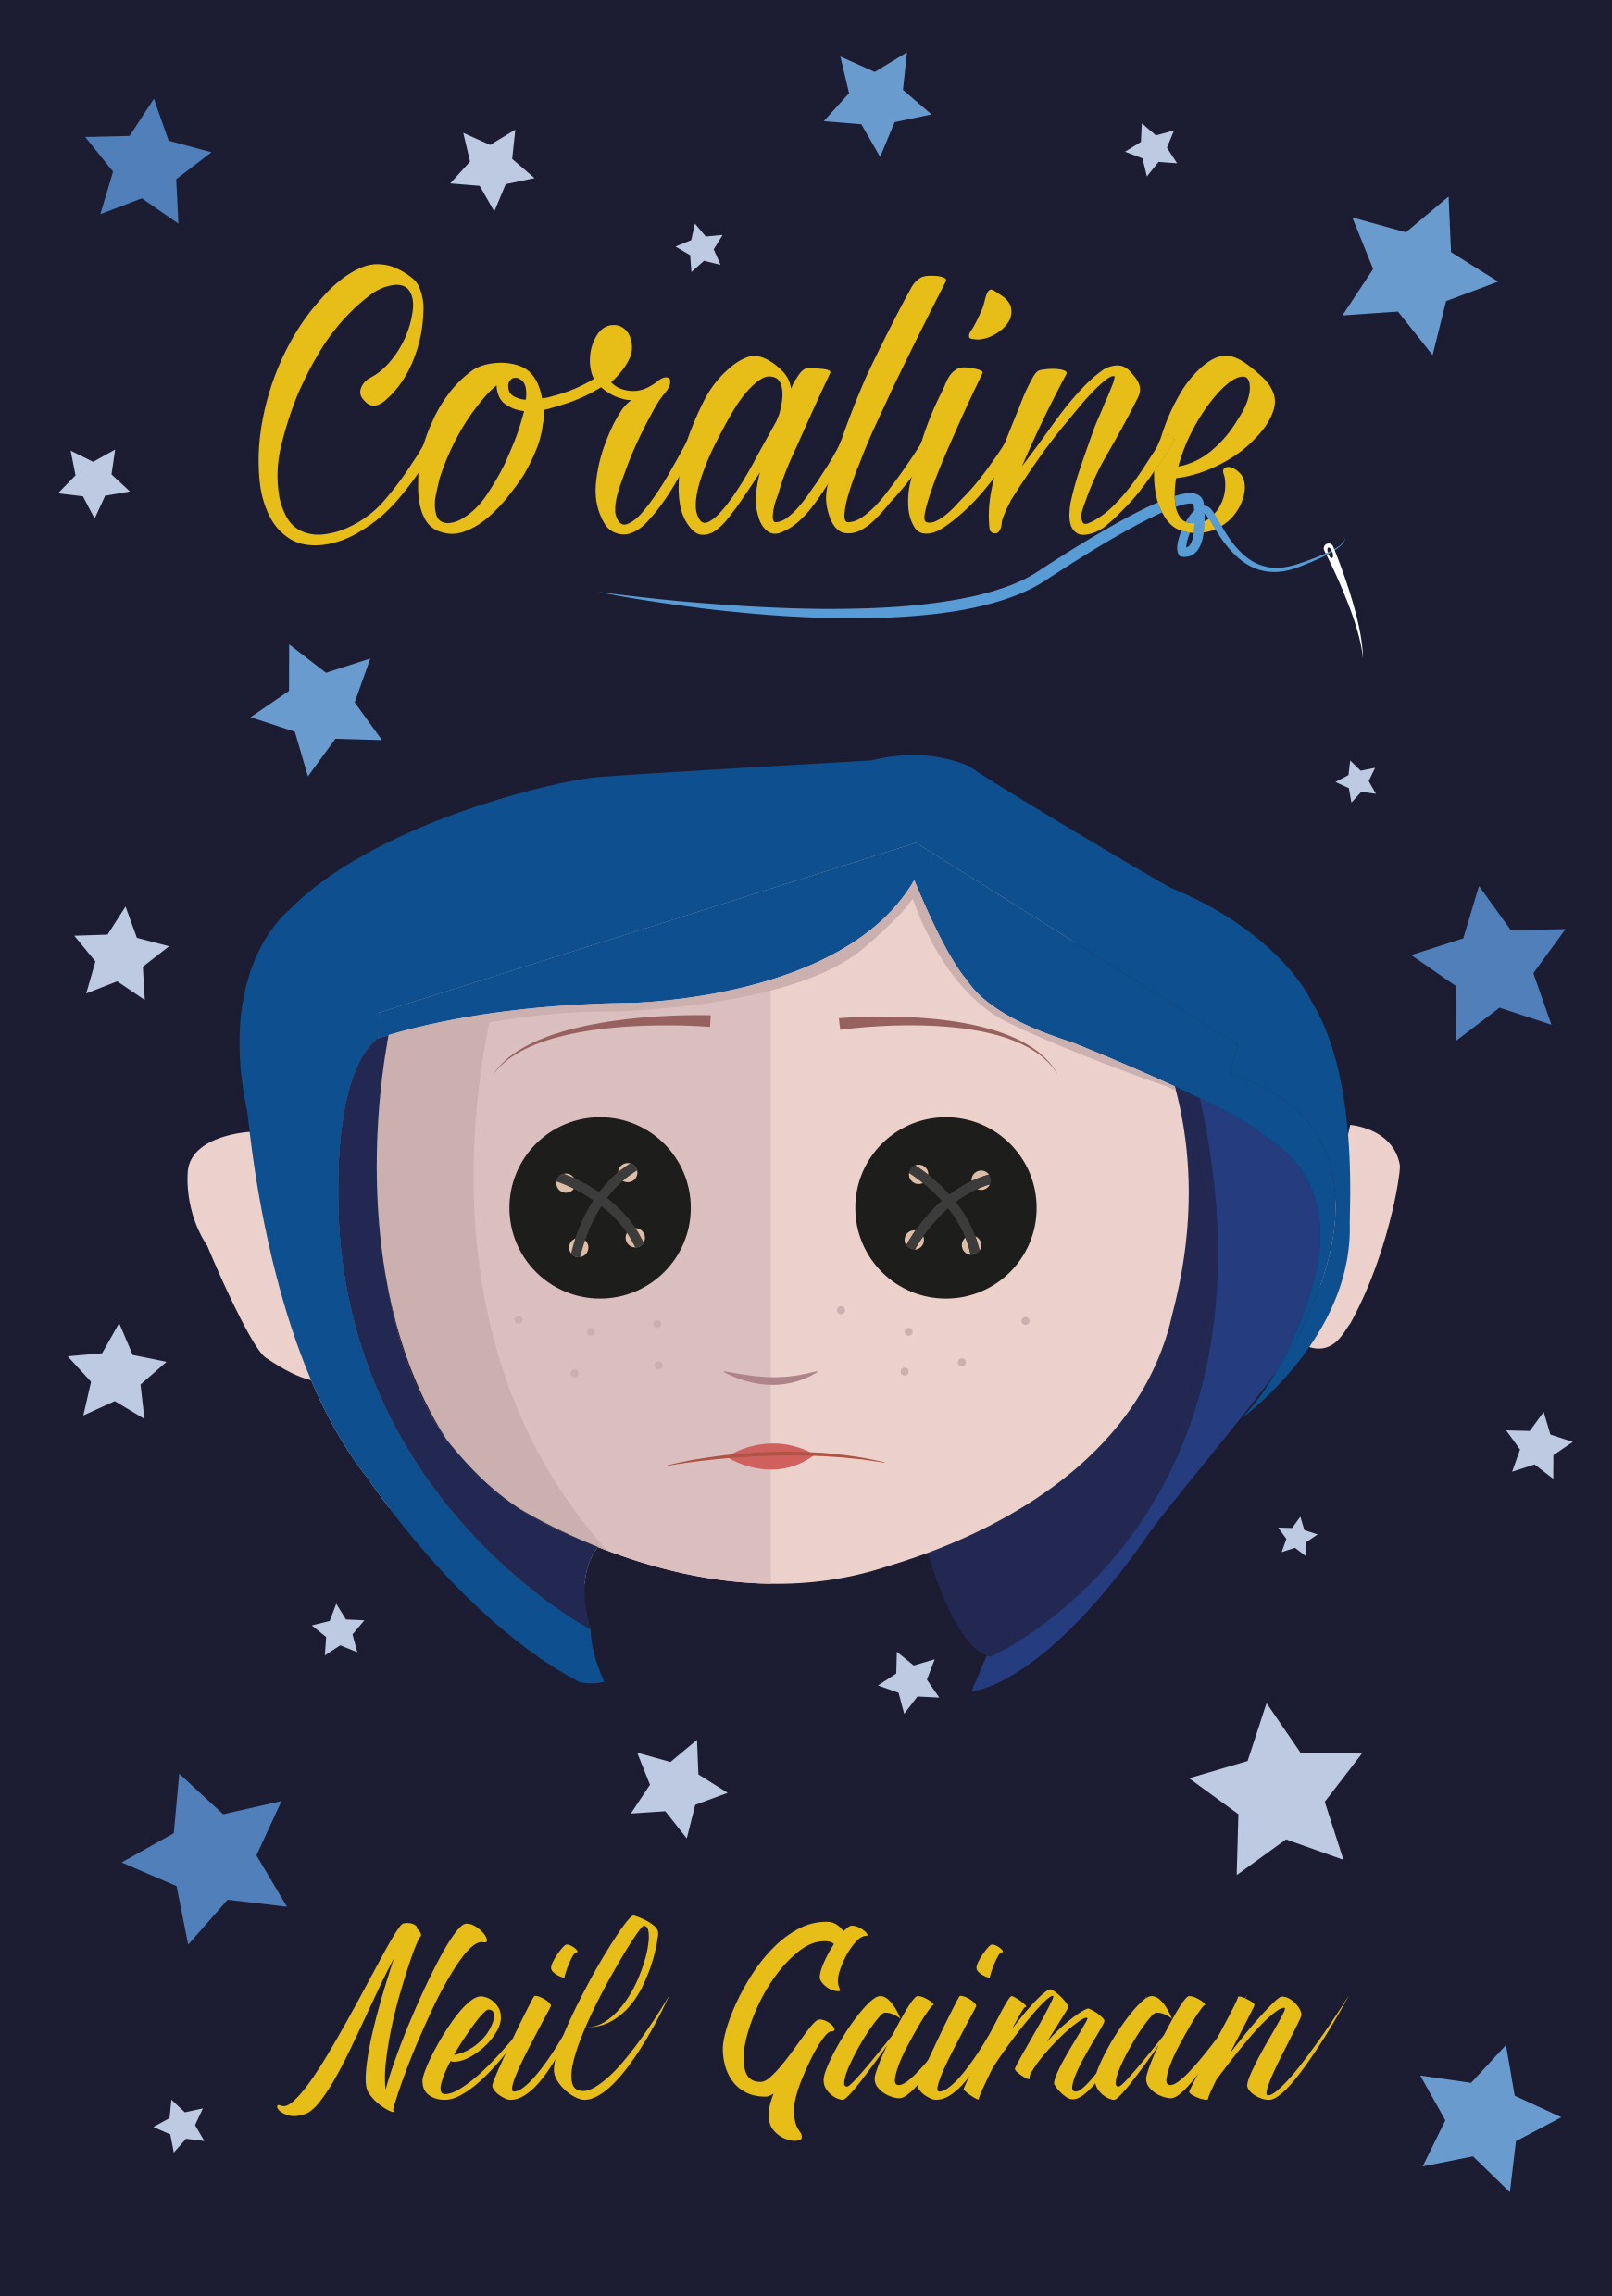 Coraline - school project, book cover by IDN666